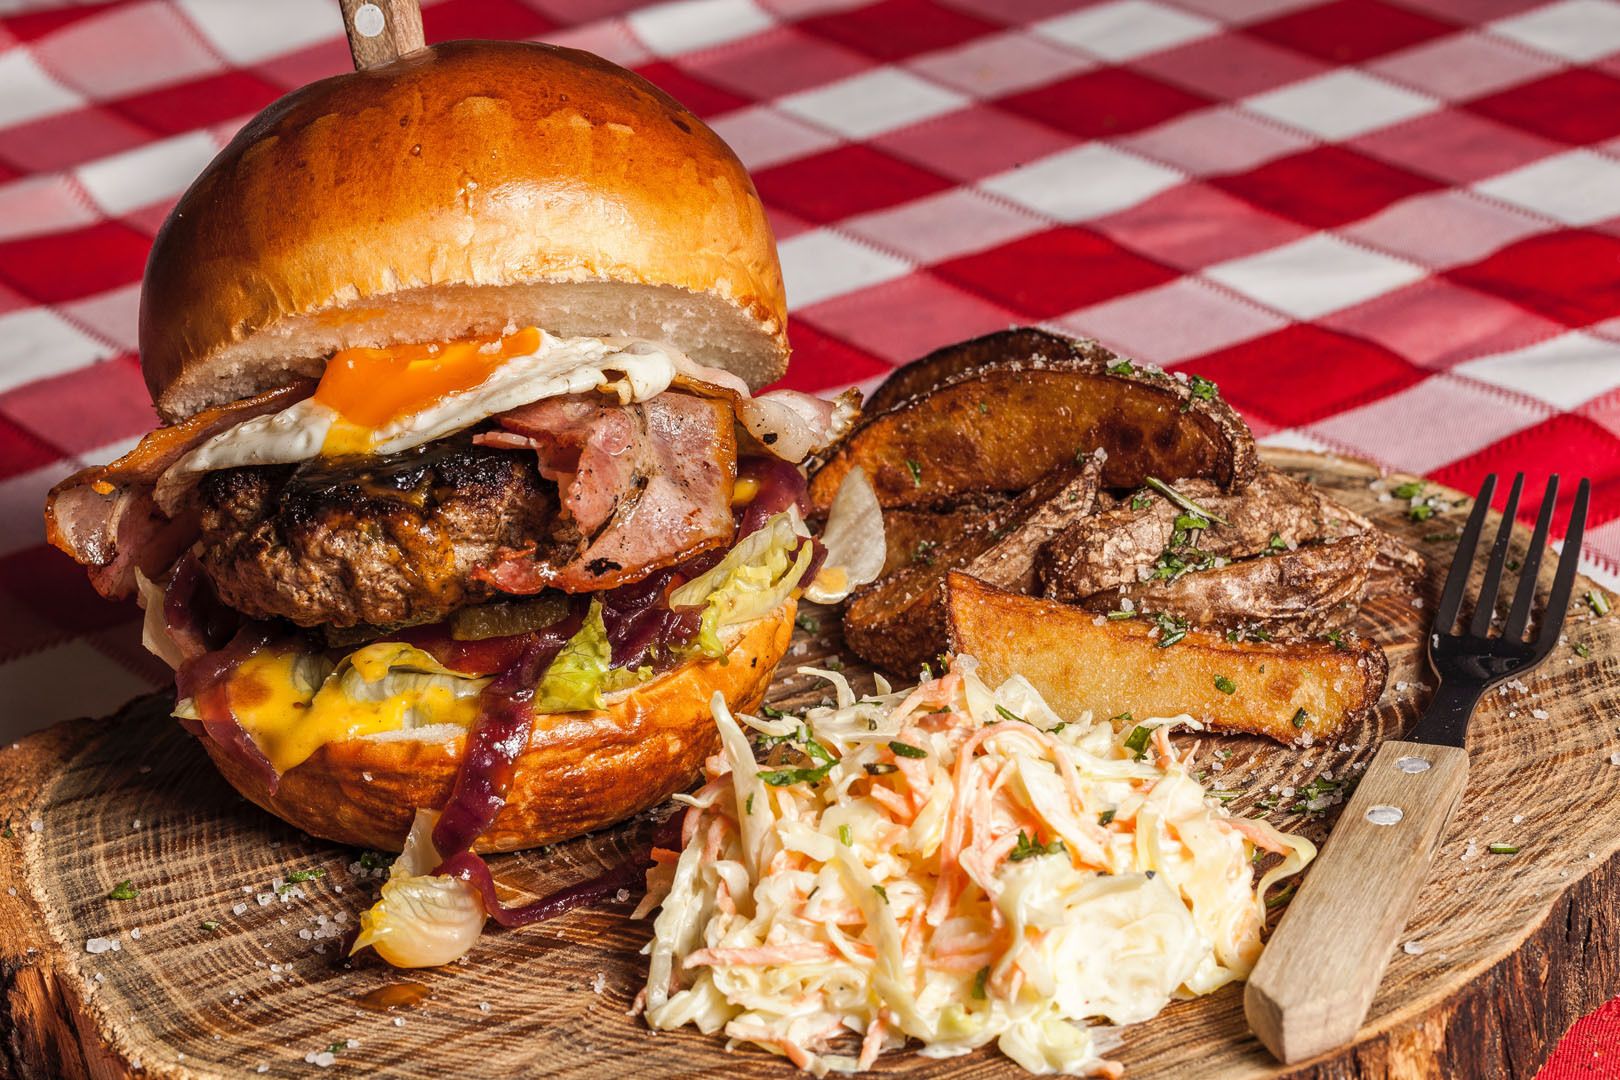 https://cdn.gastronovi.com/tmp/images/meat-burger-with-coleslaw-on-side-and-brown-handled-fork-156114_1920x1920_or_190108104090913a8.jpg